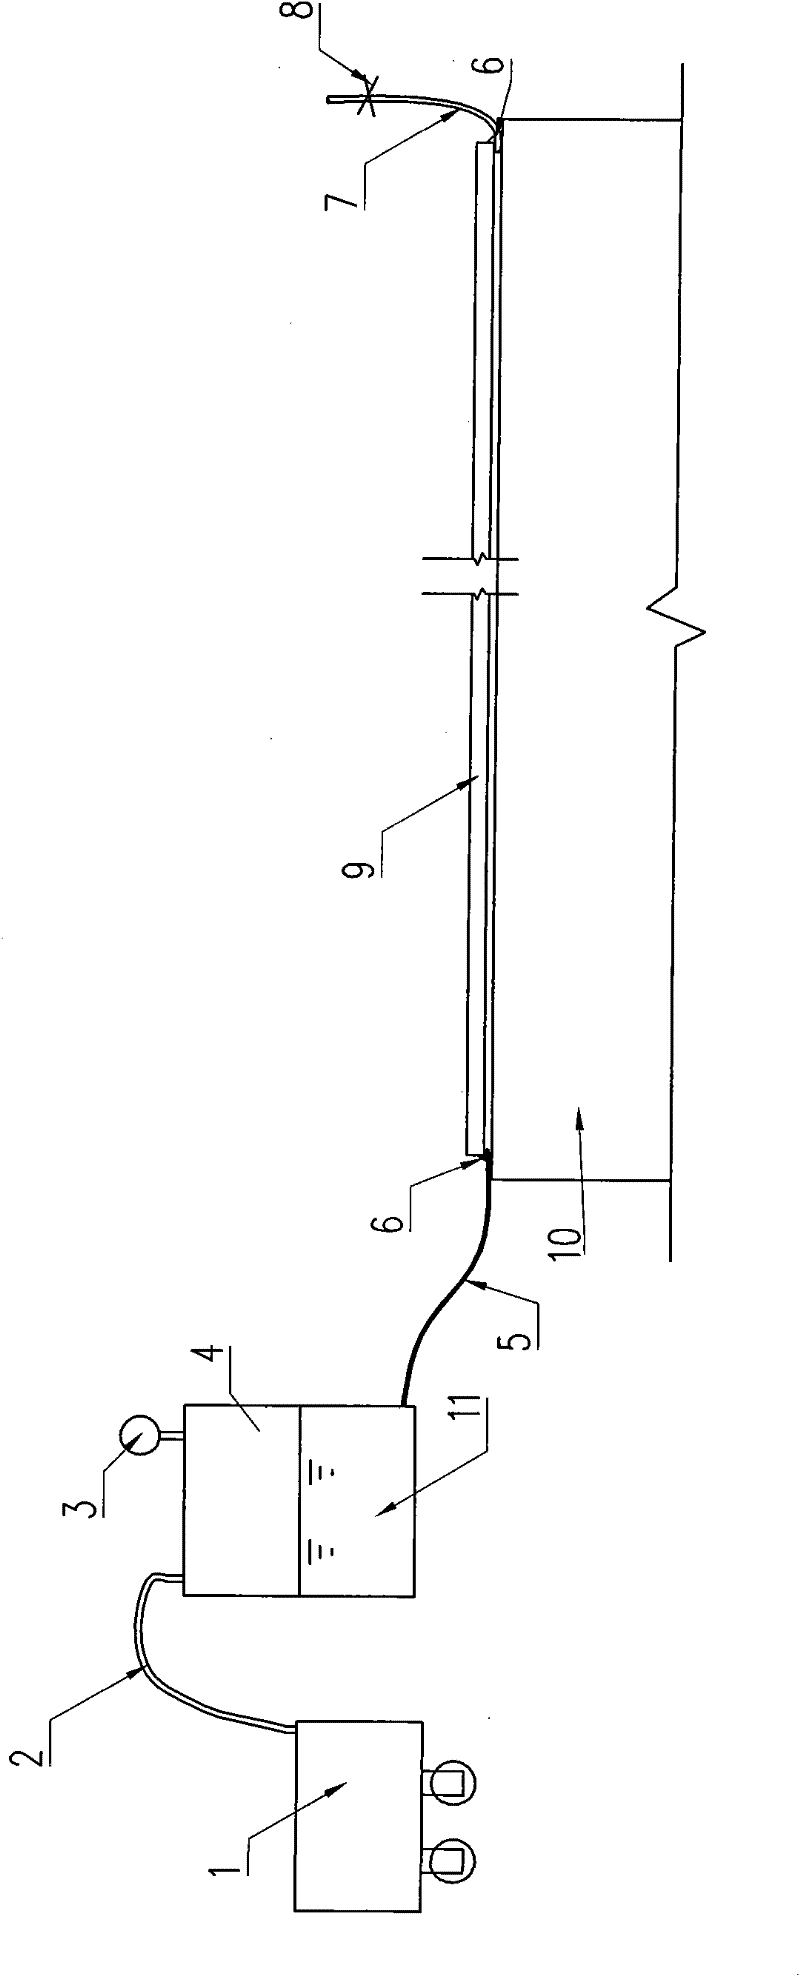 High-precision surface evening method for large-sized high-bearing capability steel structure slideways